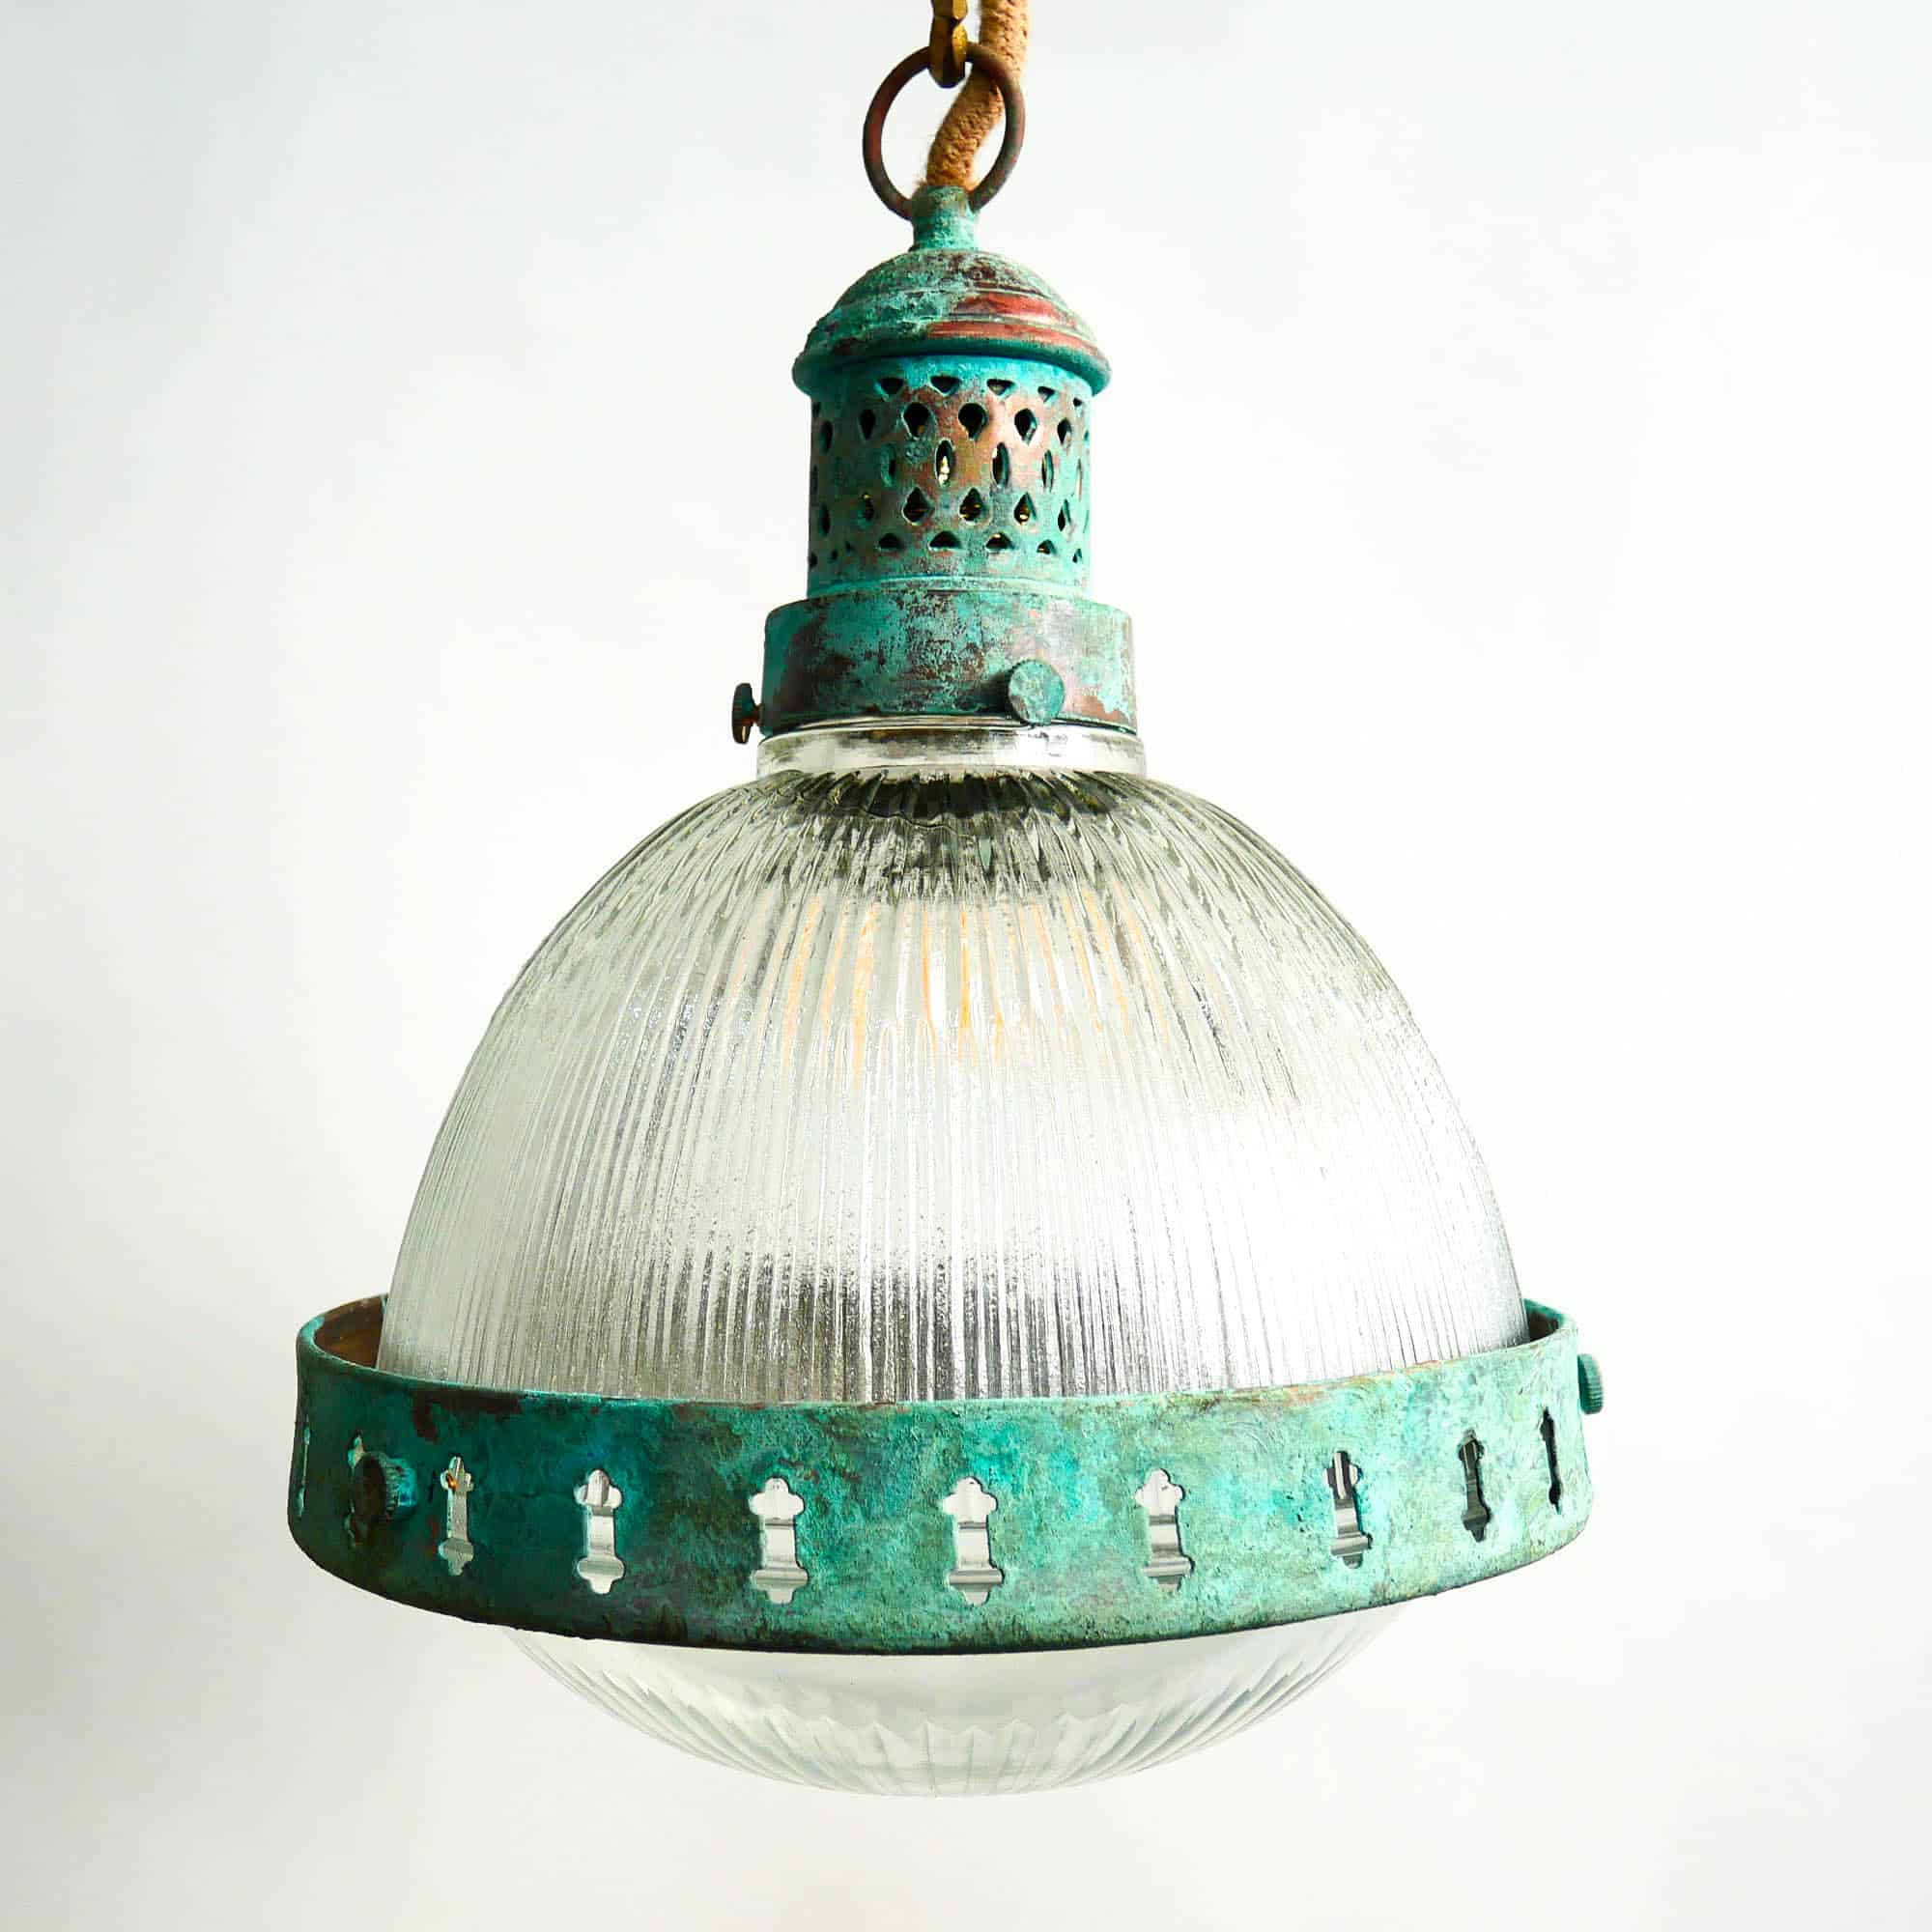 “Jules Verne” Pendant Light with Blue Patina – Small Format anciellitude